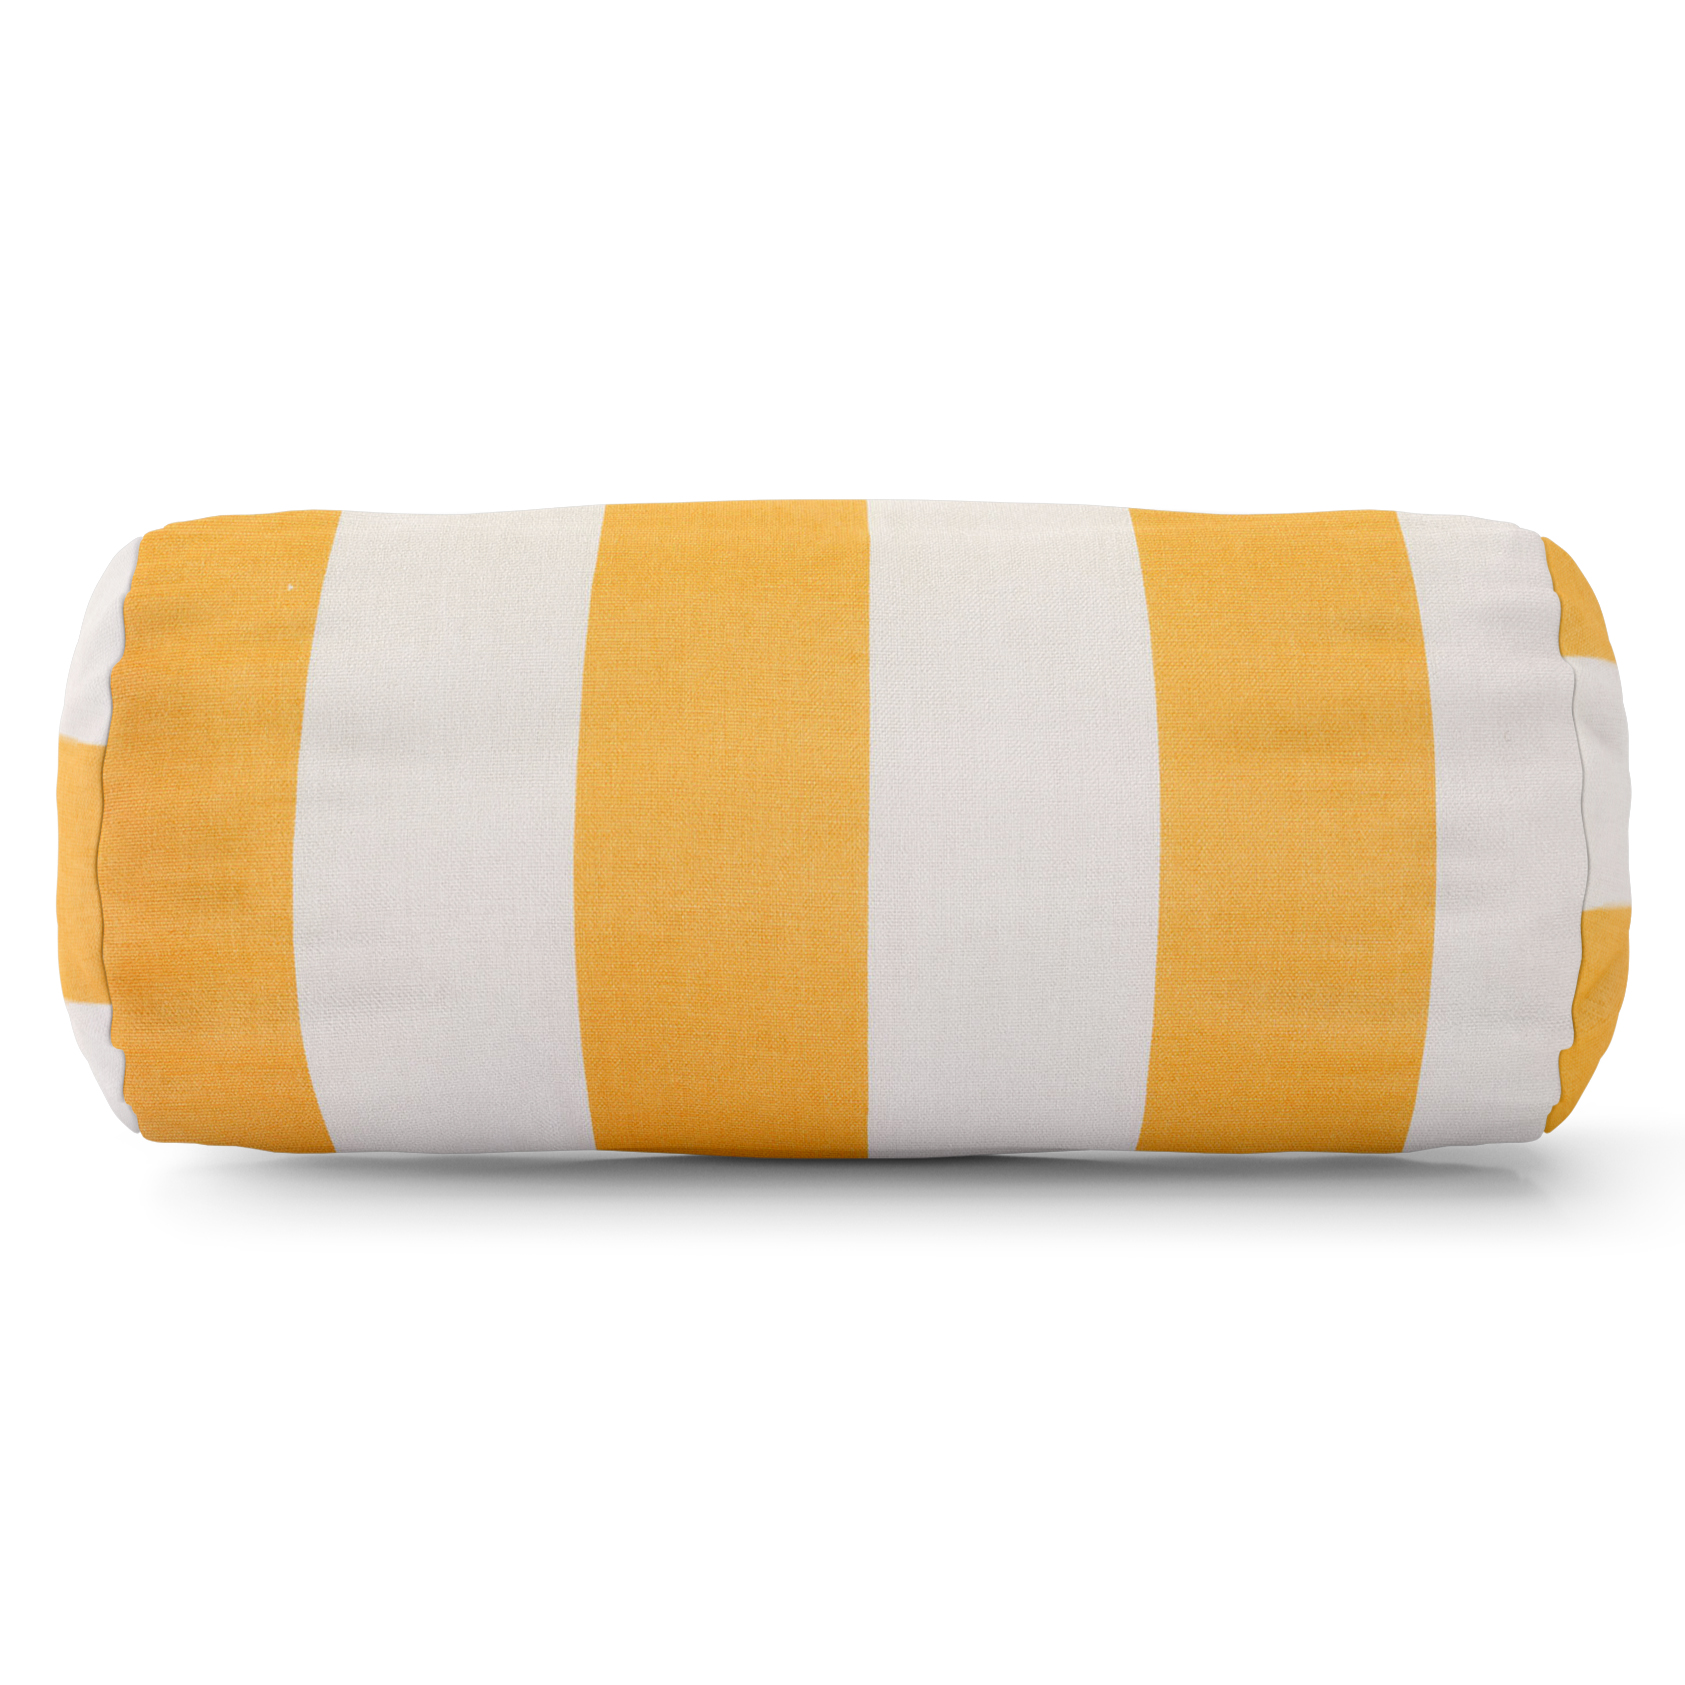 Majestic Home Goods Indoor Outdoor Yellow Vertical Stripe Round Bolster Decorative Throw Pillow 18.5 in L x 8 in W x 8 in H - image 1 of 6